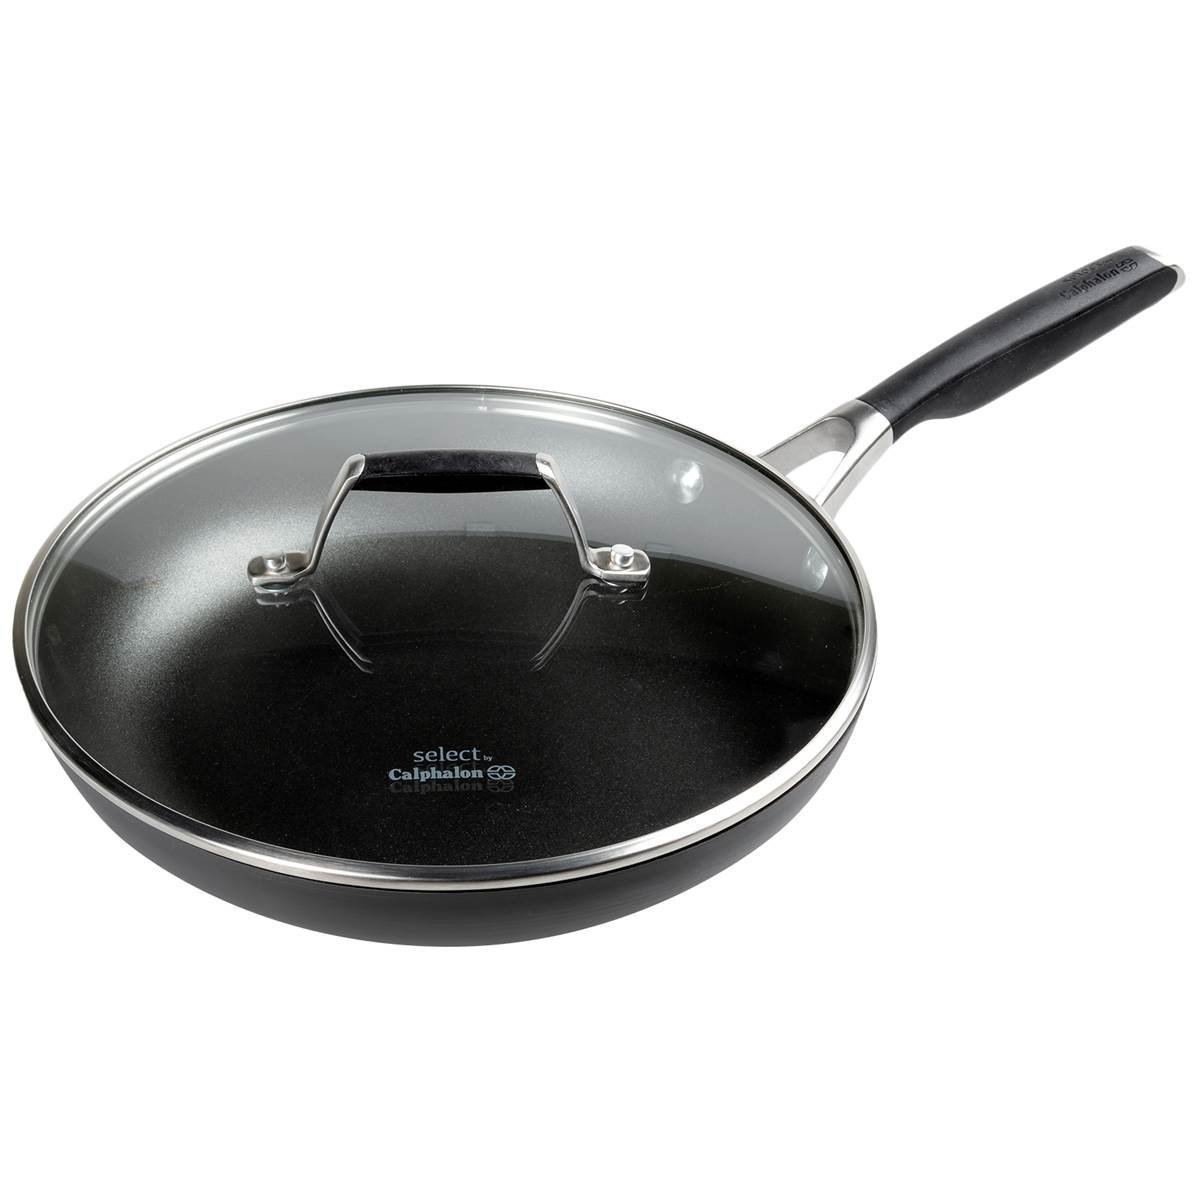 Select by Calphalon™ Hard-Anodized Nonstick 10-Inch Fry Pan with 